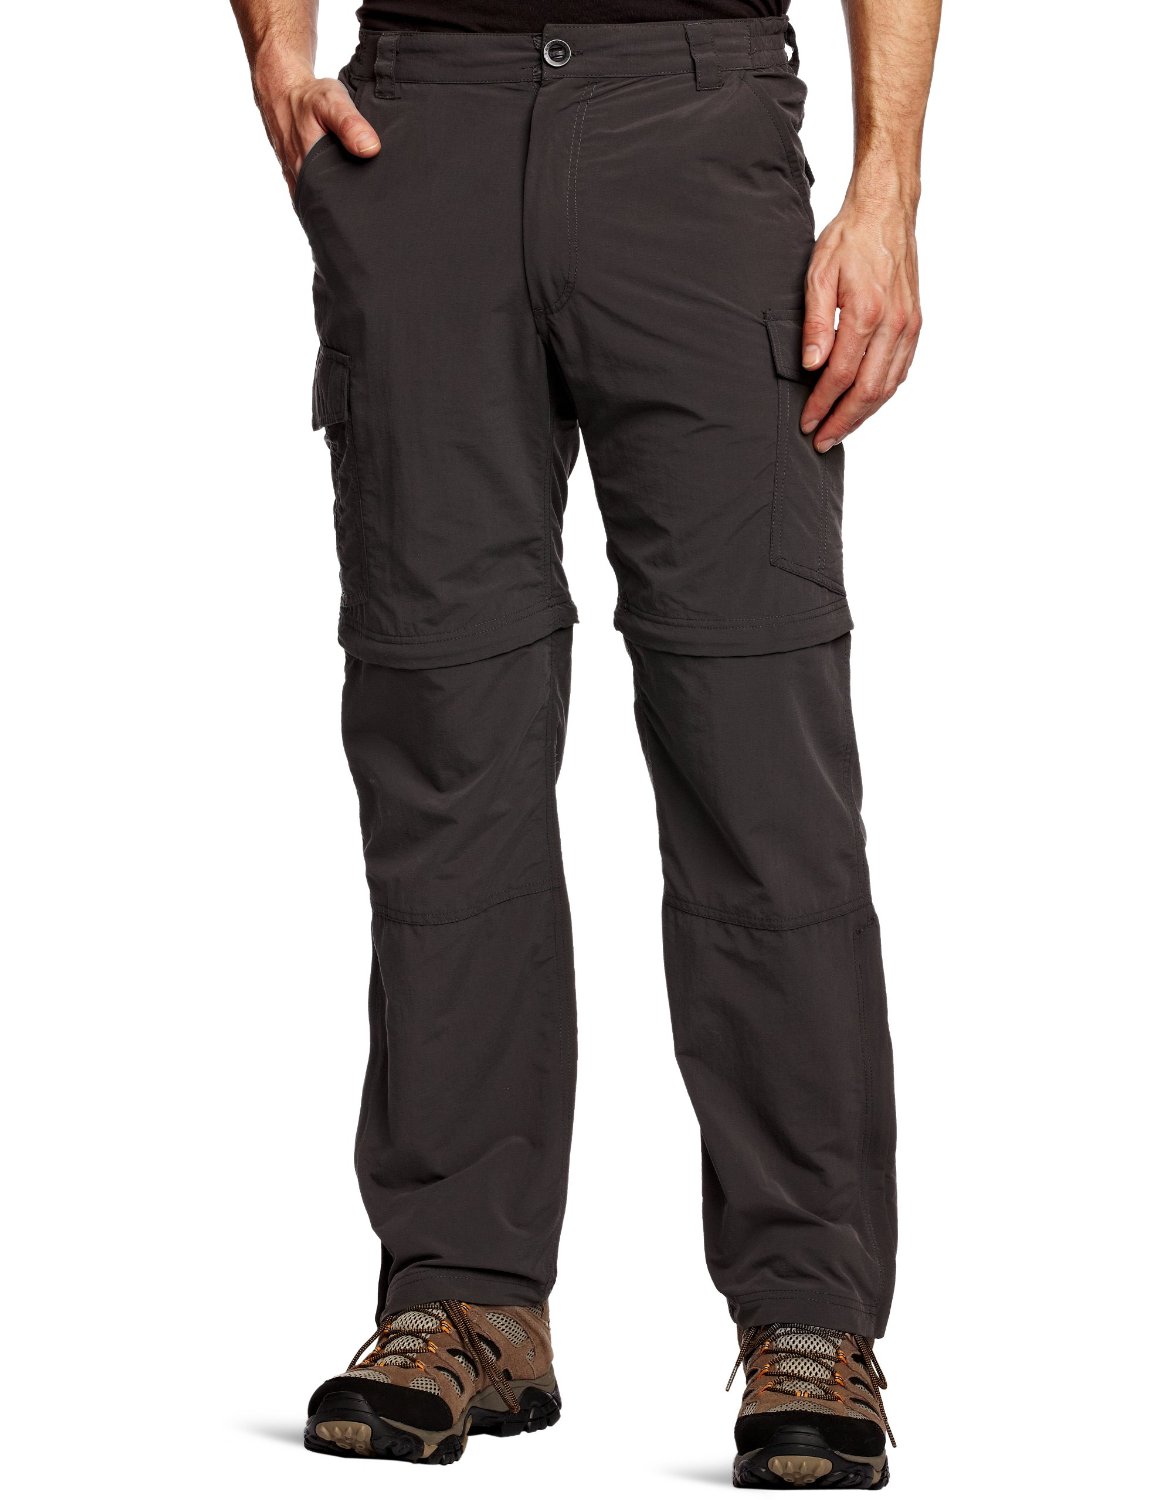 craghoppers Full Trousers